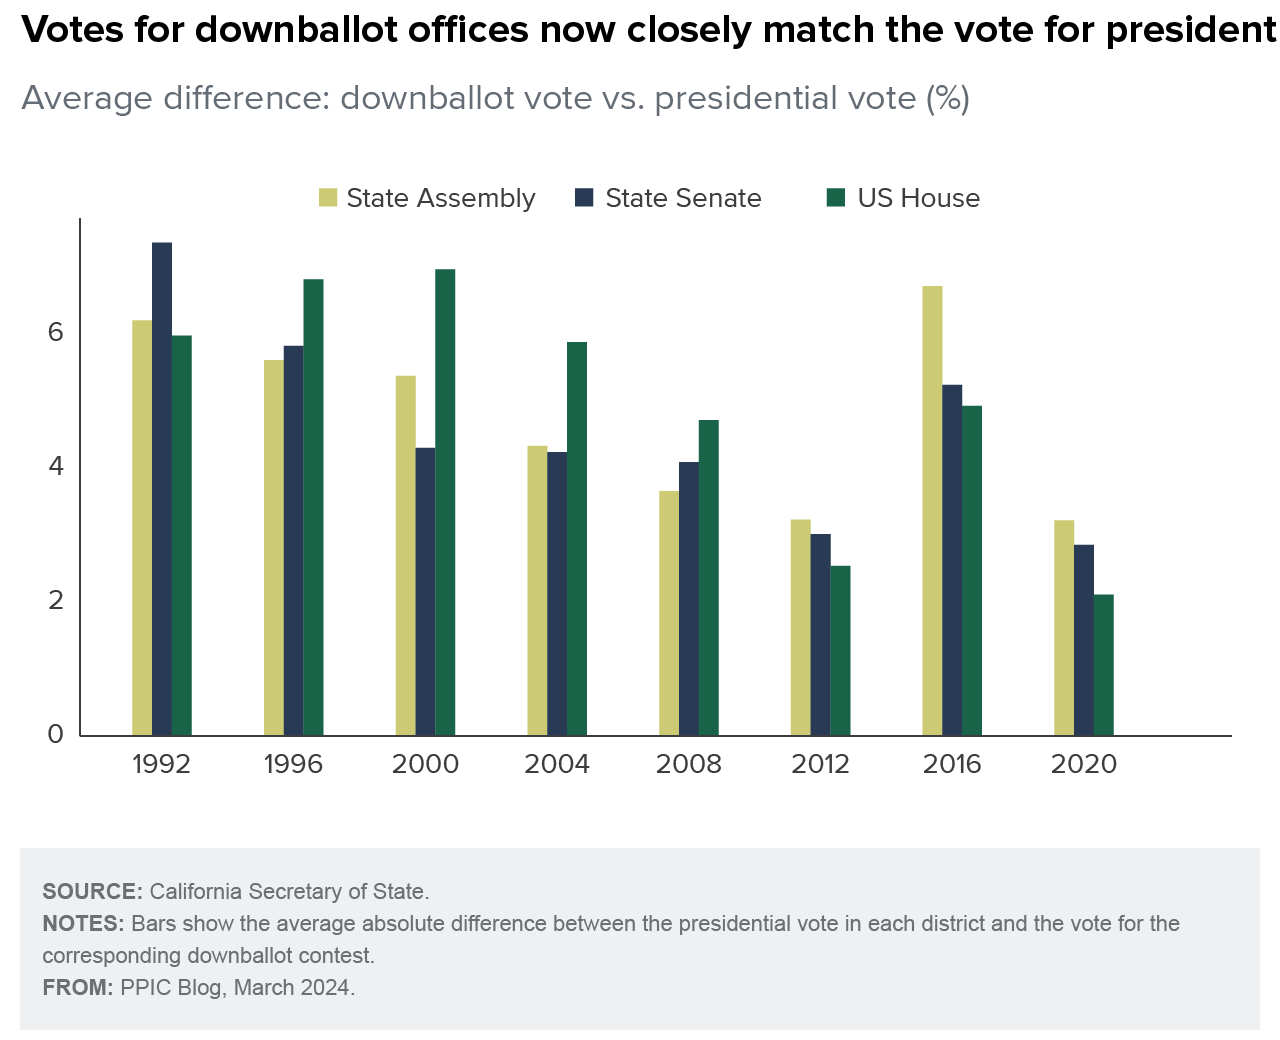 figure - Votes for downballot offices now closely match the vote for president